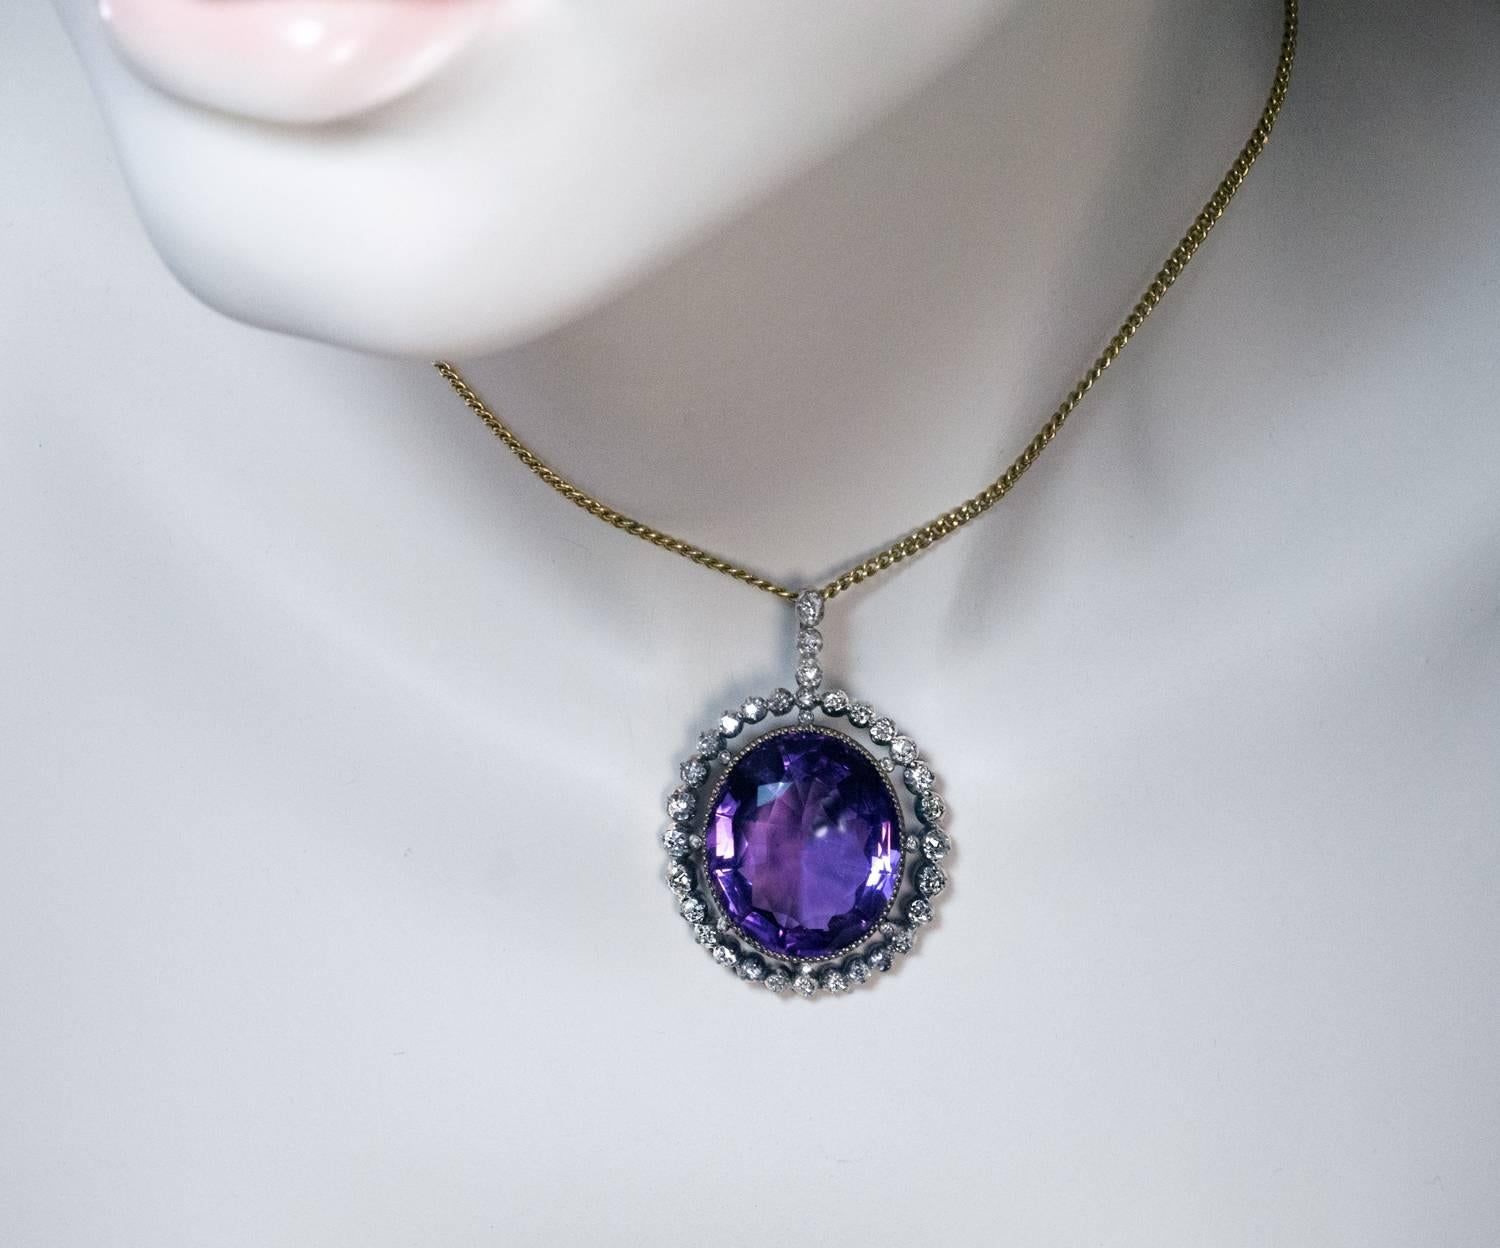 Circa 1870

The silver topped gold pendant is centered with a large oval amethyst (24 x 20 x 11.3 mm, approximately 28.75 ct) set in a diamond frame with diamond encrusted bail.

31 antique cushion cut and 8 old rose cut diamonds

Estimated